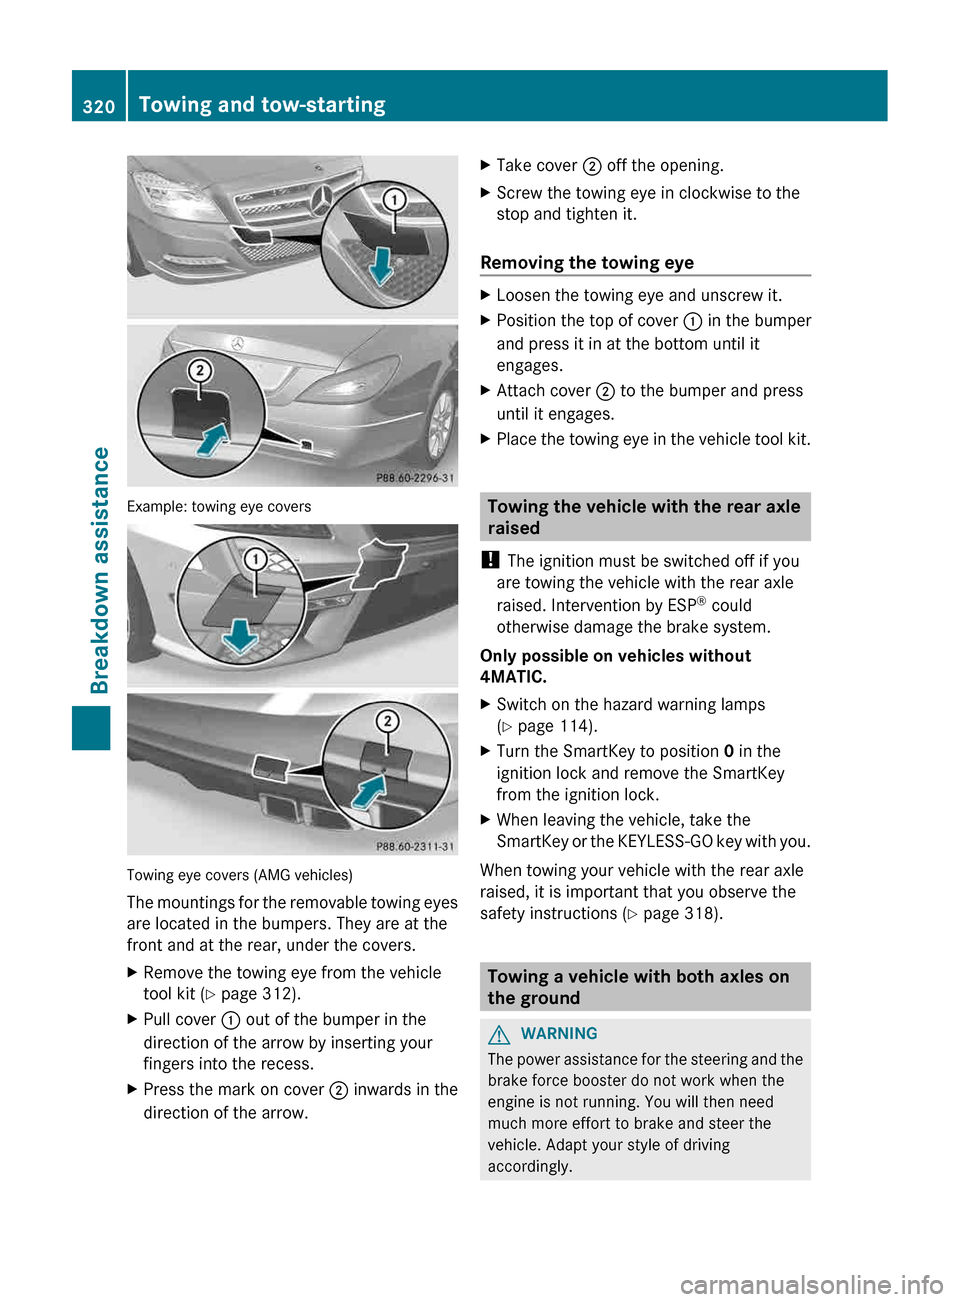 MERCEDES-BENZ CLS-Class 2013 W218 Repair Manual Example: towing eye covers
Towing eye covers (AMG vehicles)
The 
mountings for the removable towing eyes
are located in the bumpers. They are at the
front and at the rear, under the covers.
X Remove t